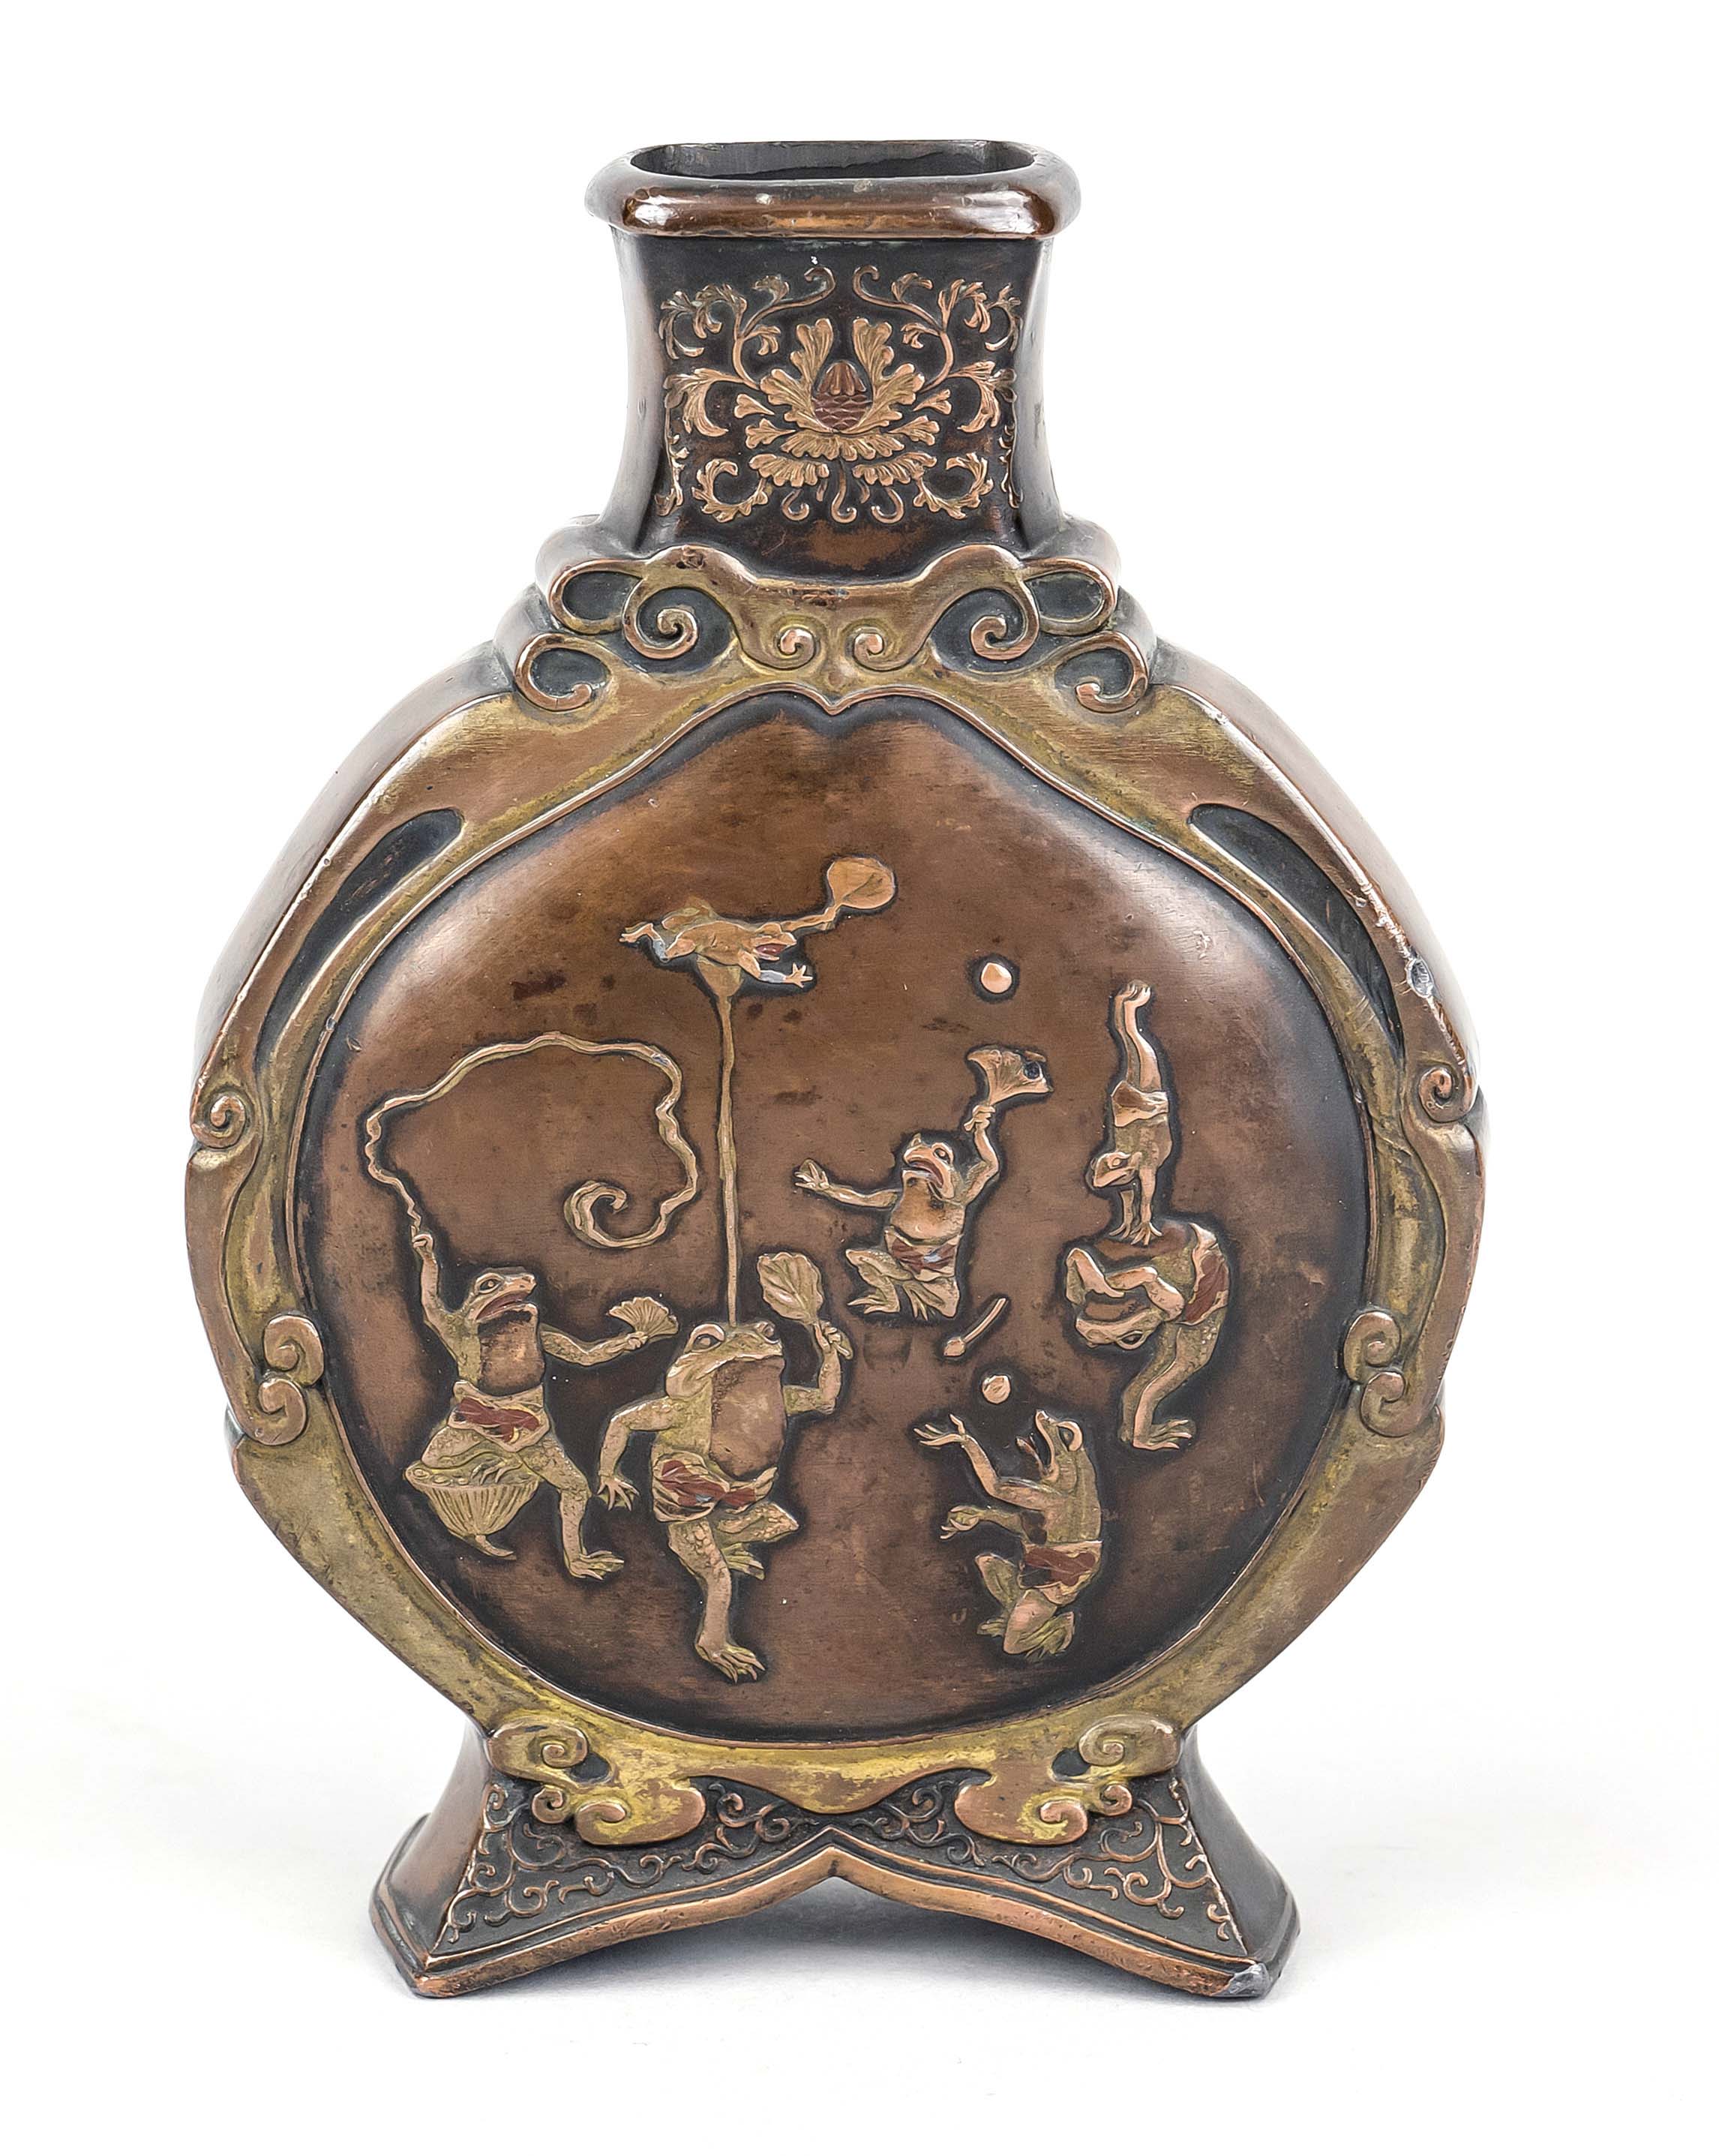 Moon flask vase with relief decoration, Japan late 19th century (Meiji), bronze. Amusing relief